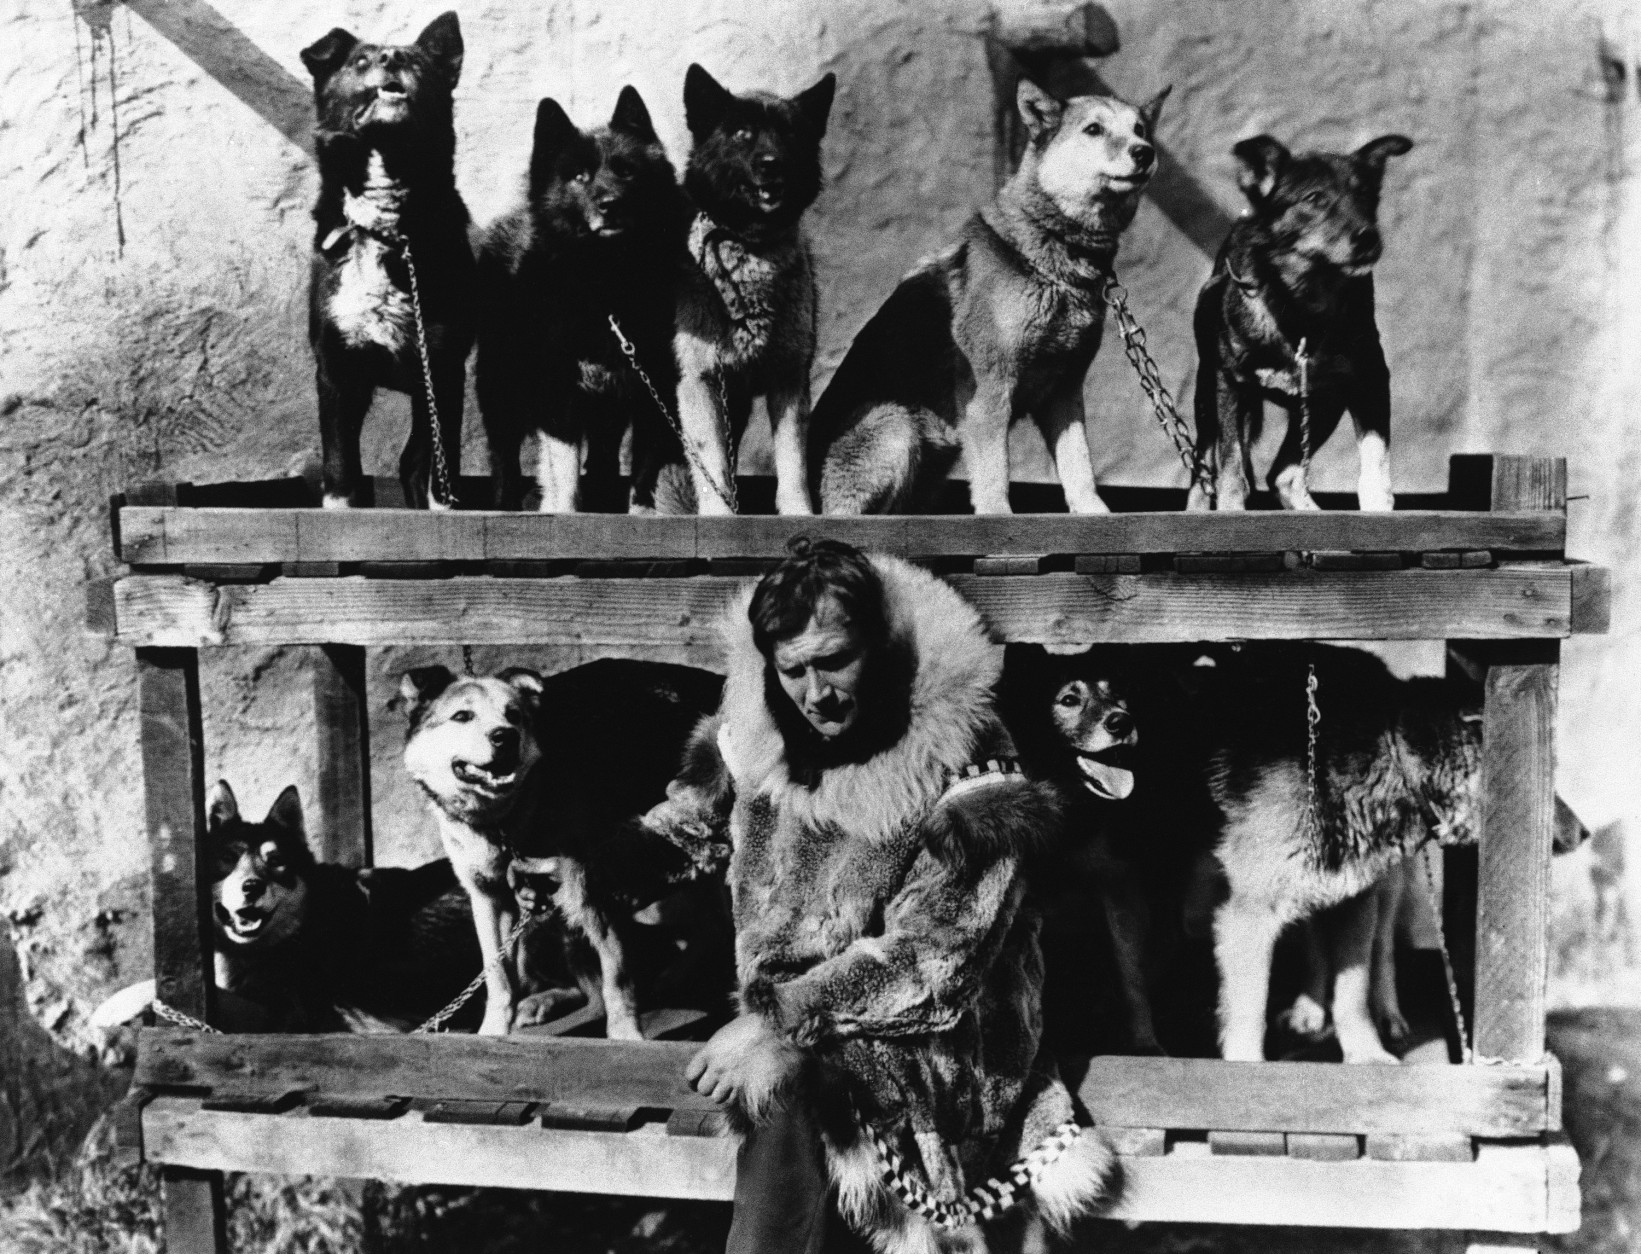 FILE -- In this 1925 file photo, Gunnar Kaasen poses with his original dog team which he drove through a blinding blizzard to deliver life-saving serum Nome, Alaska. Kaasen's lead dog Balto is shown in top row, second from left. In January 1925, sled dog relay teams delivered the serum after a deadly outbreak of diphtheria in the old gold rush town of Nome on the state's wind-pummeled western coast. The 5 ½-day run is detailed in "Icebound," a documentary by New York filmmaker Daniel Anker. The 95-minute film, narrated by actor Patrick Stewart, is opening the Anchorage International Film Festival on Friday, Dec. 6, 2013. (AP Photo, File)